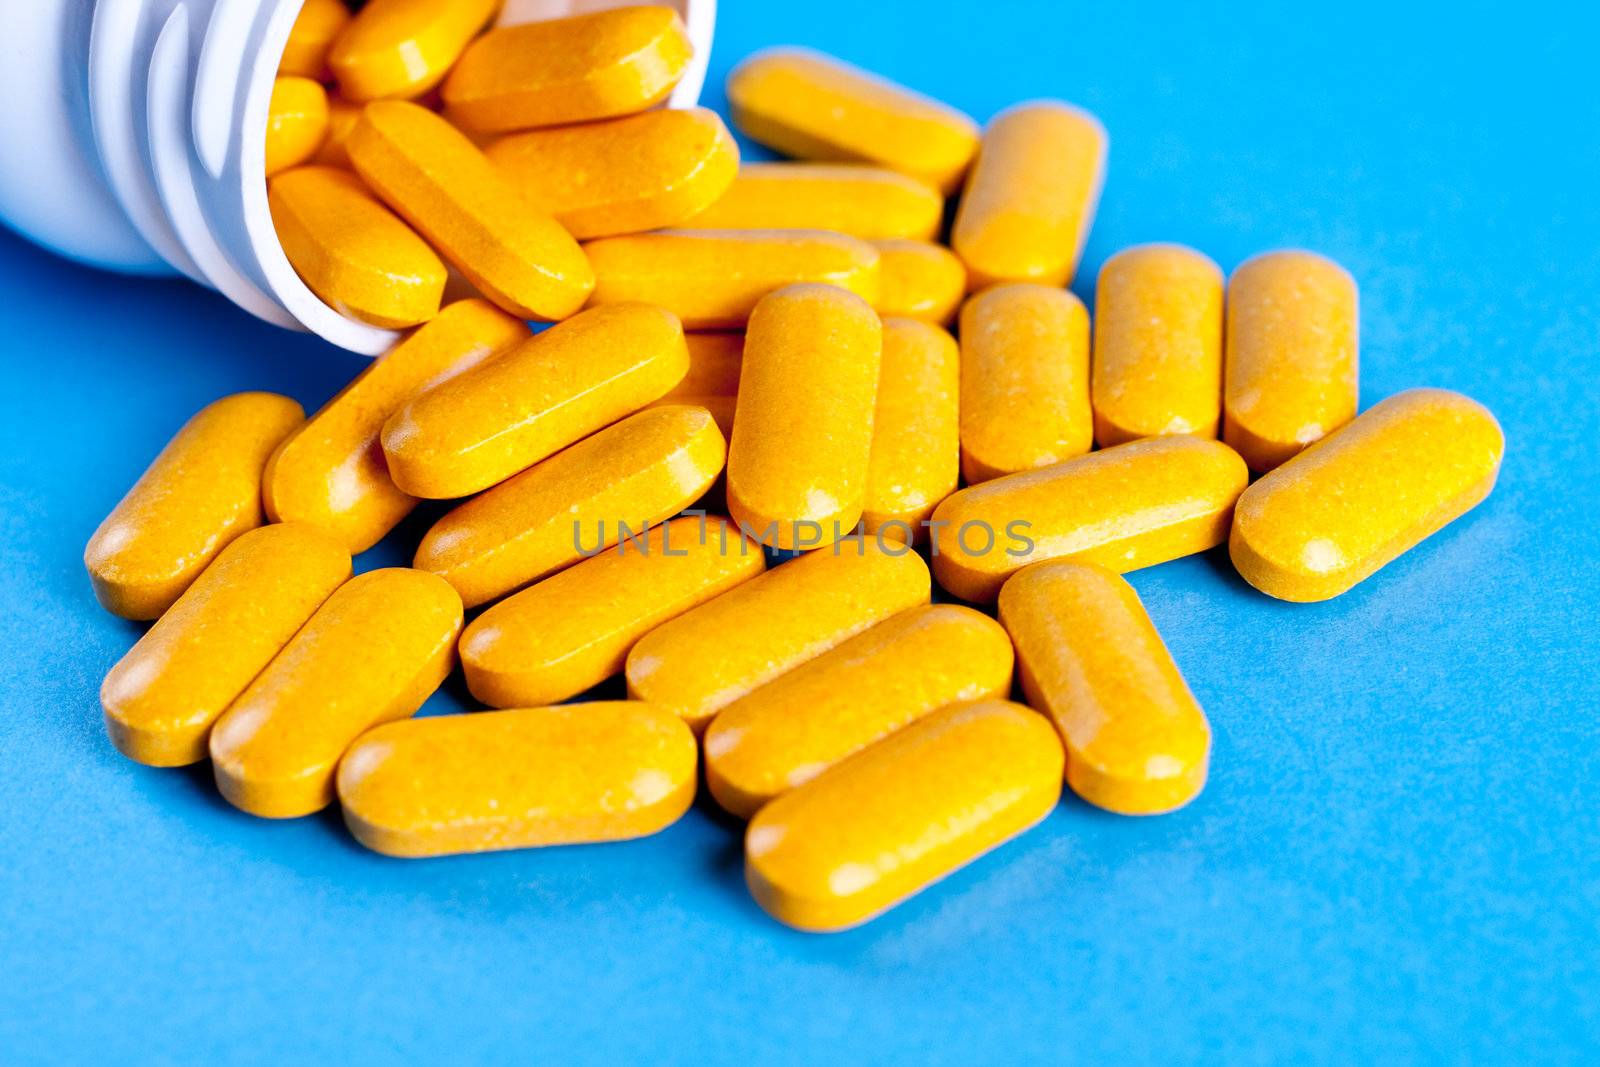 supplements in pill form on a blue background